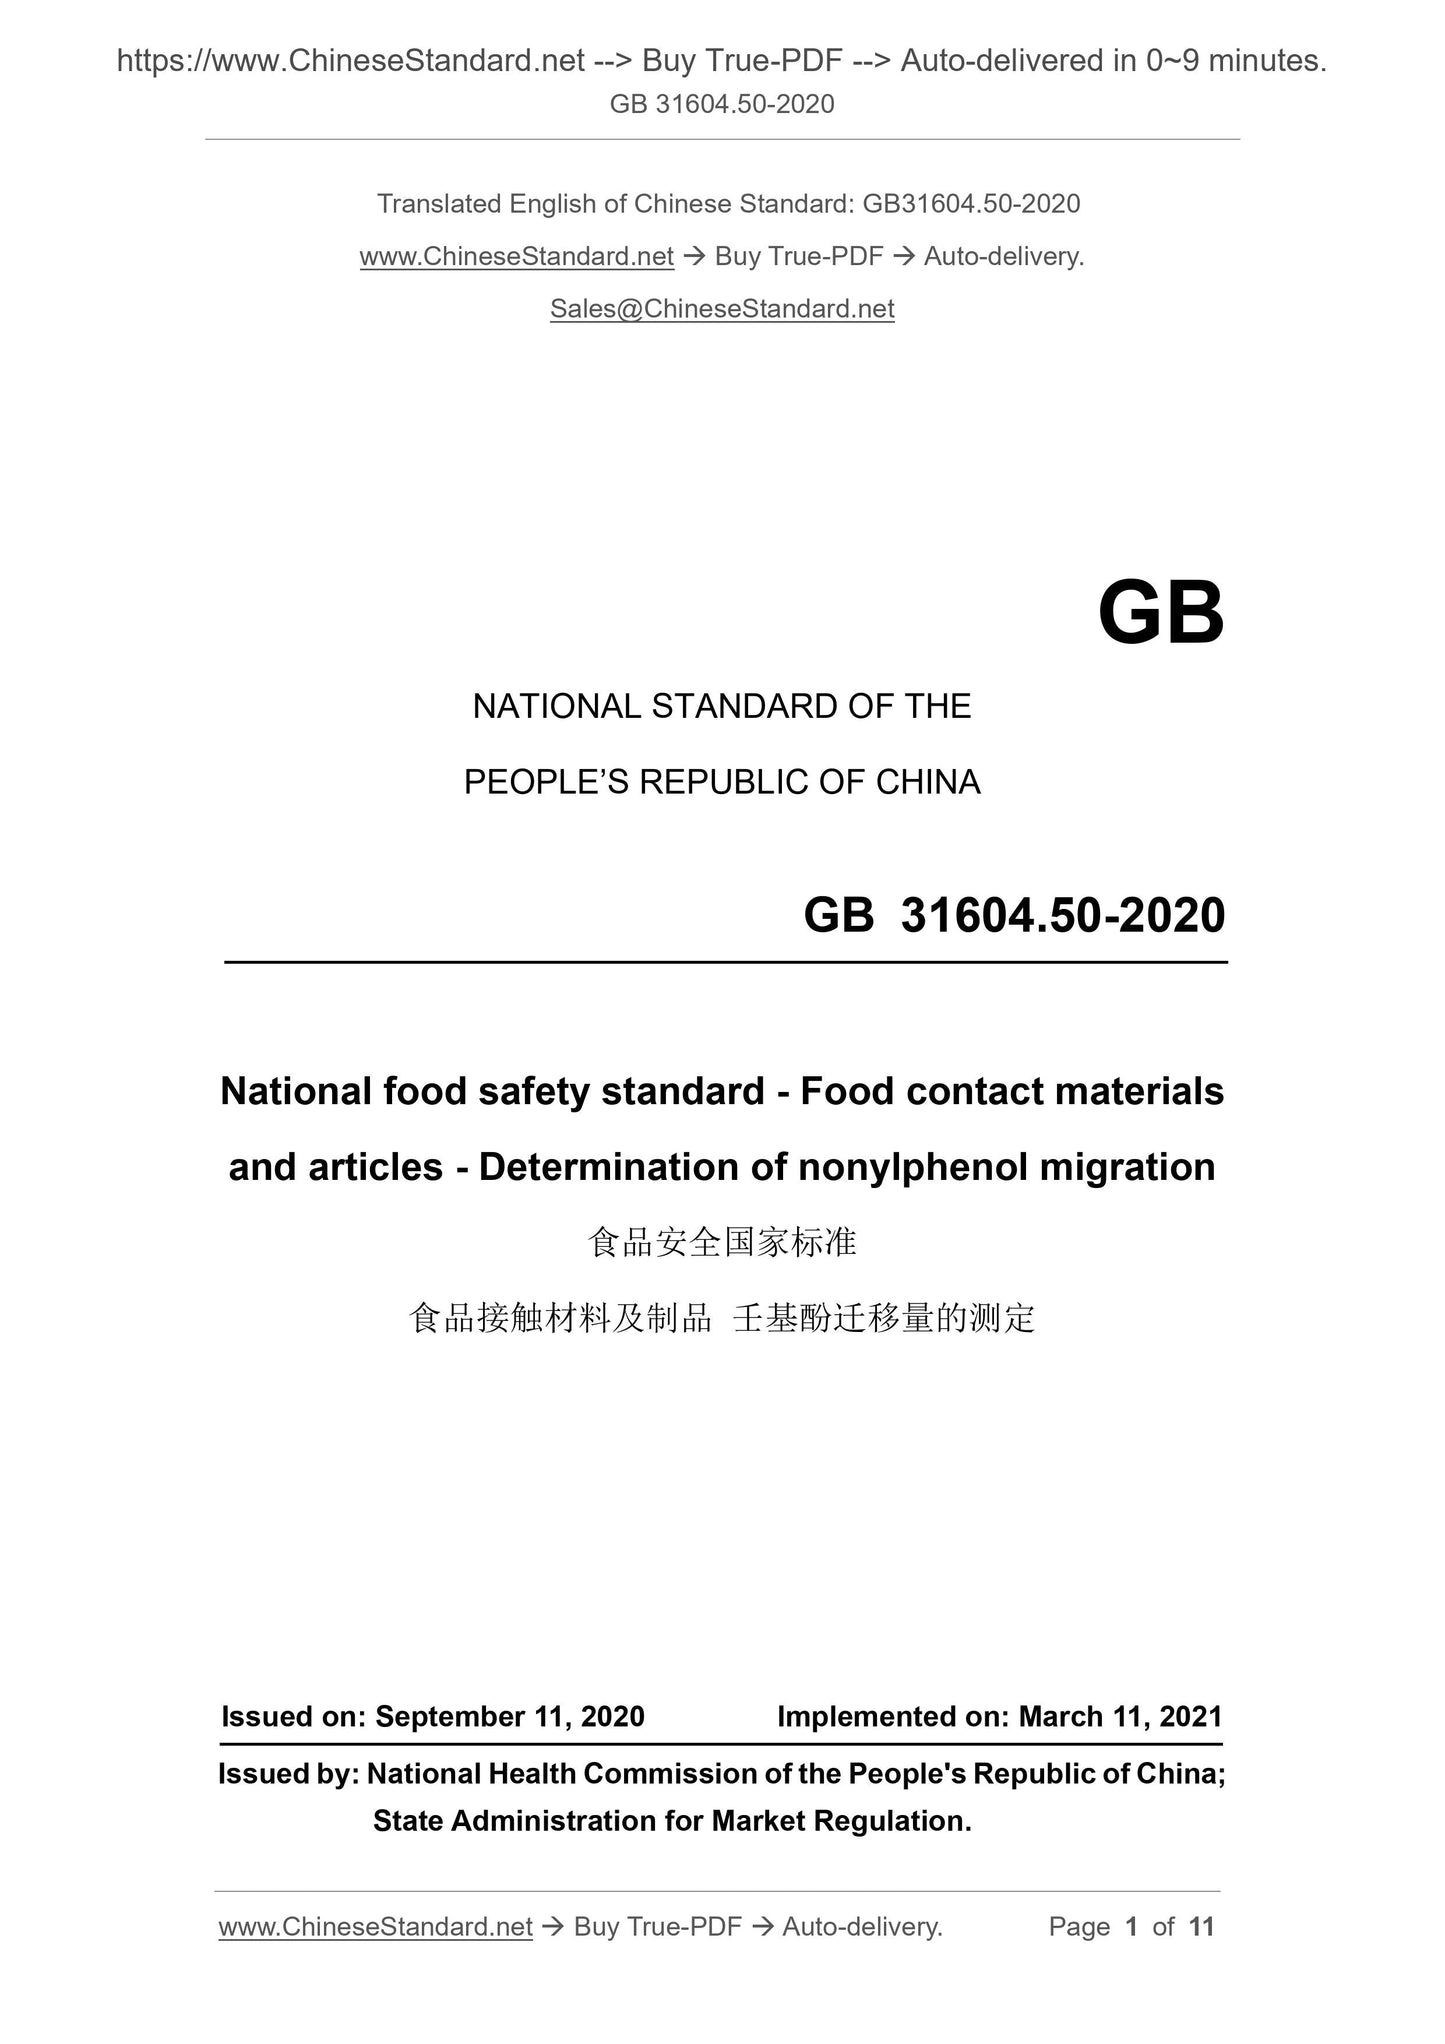 GB 31604.50-2020 Page 1